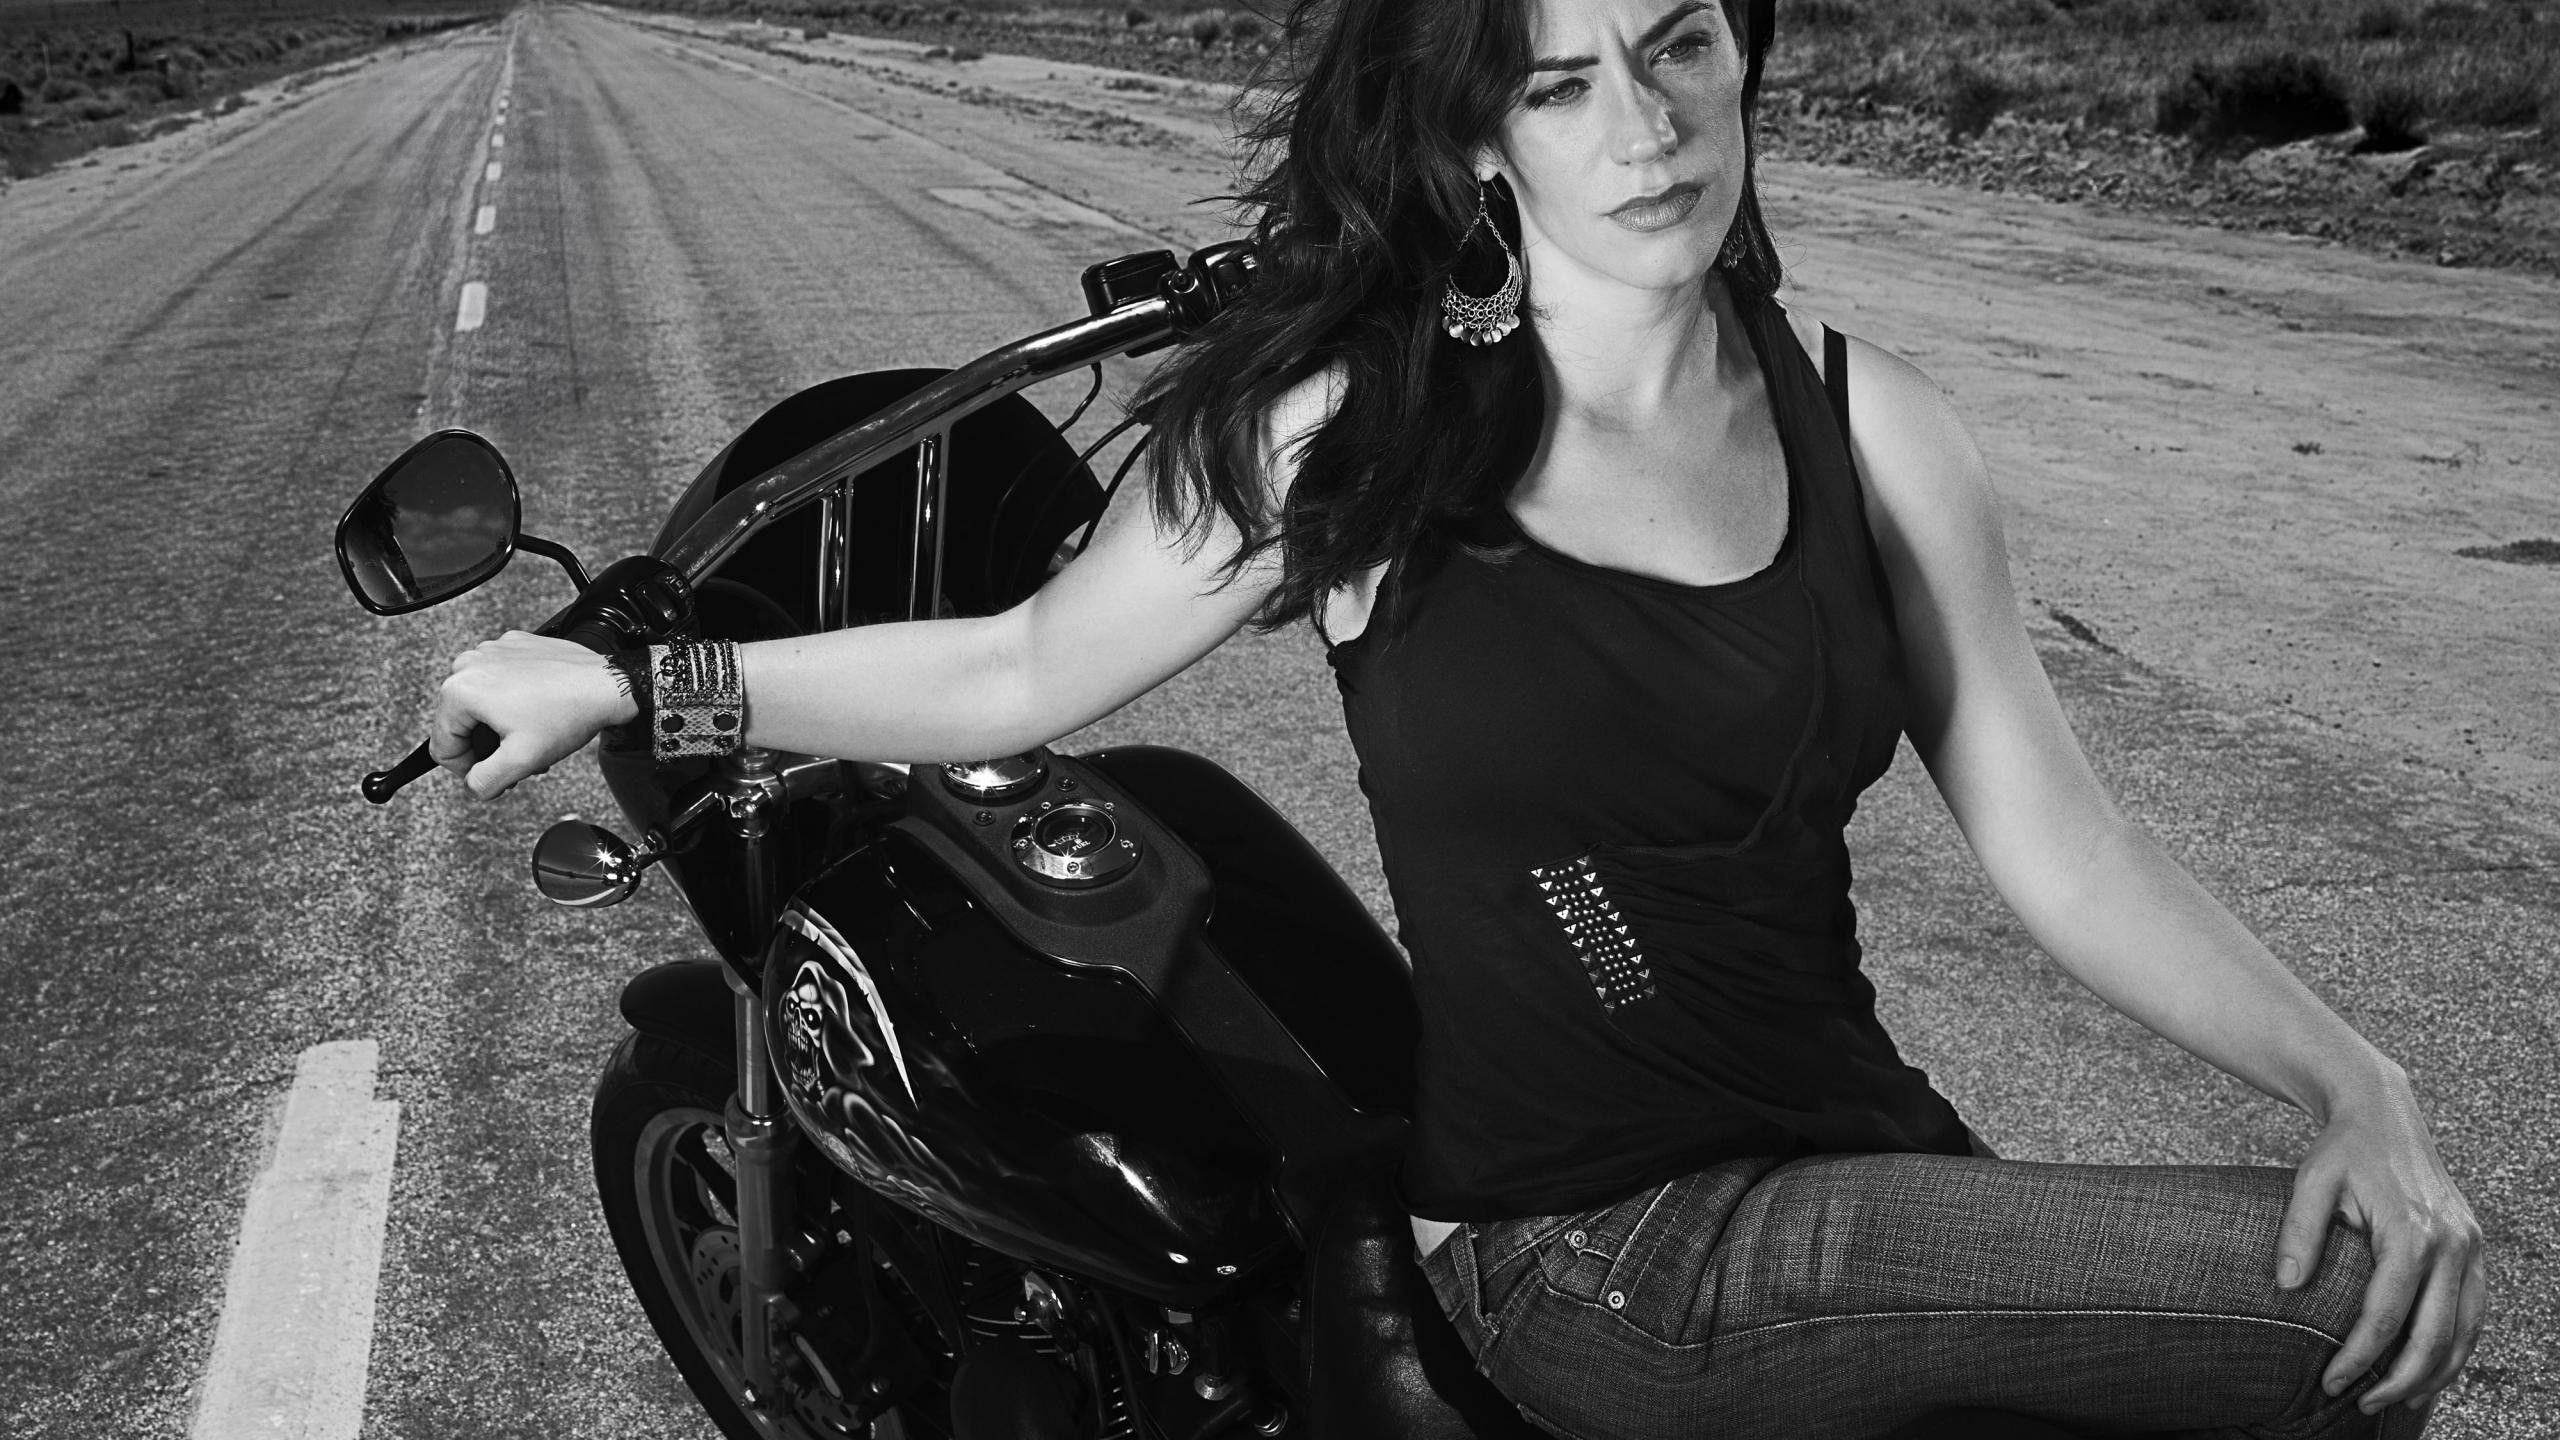 Sons Of Anarchy Maggie Siff Monochrome Women Actress Women With Bikes Tank Top Jeans 2560x1440